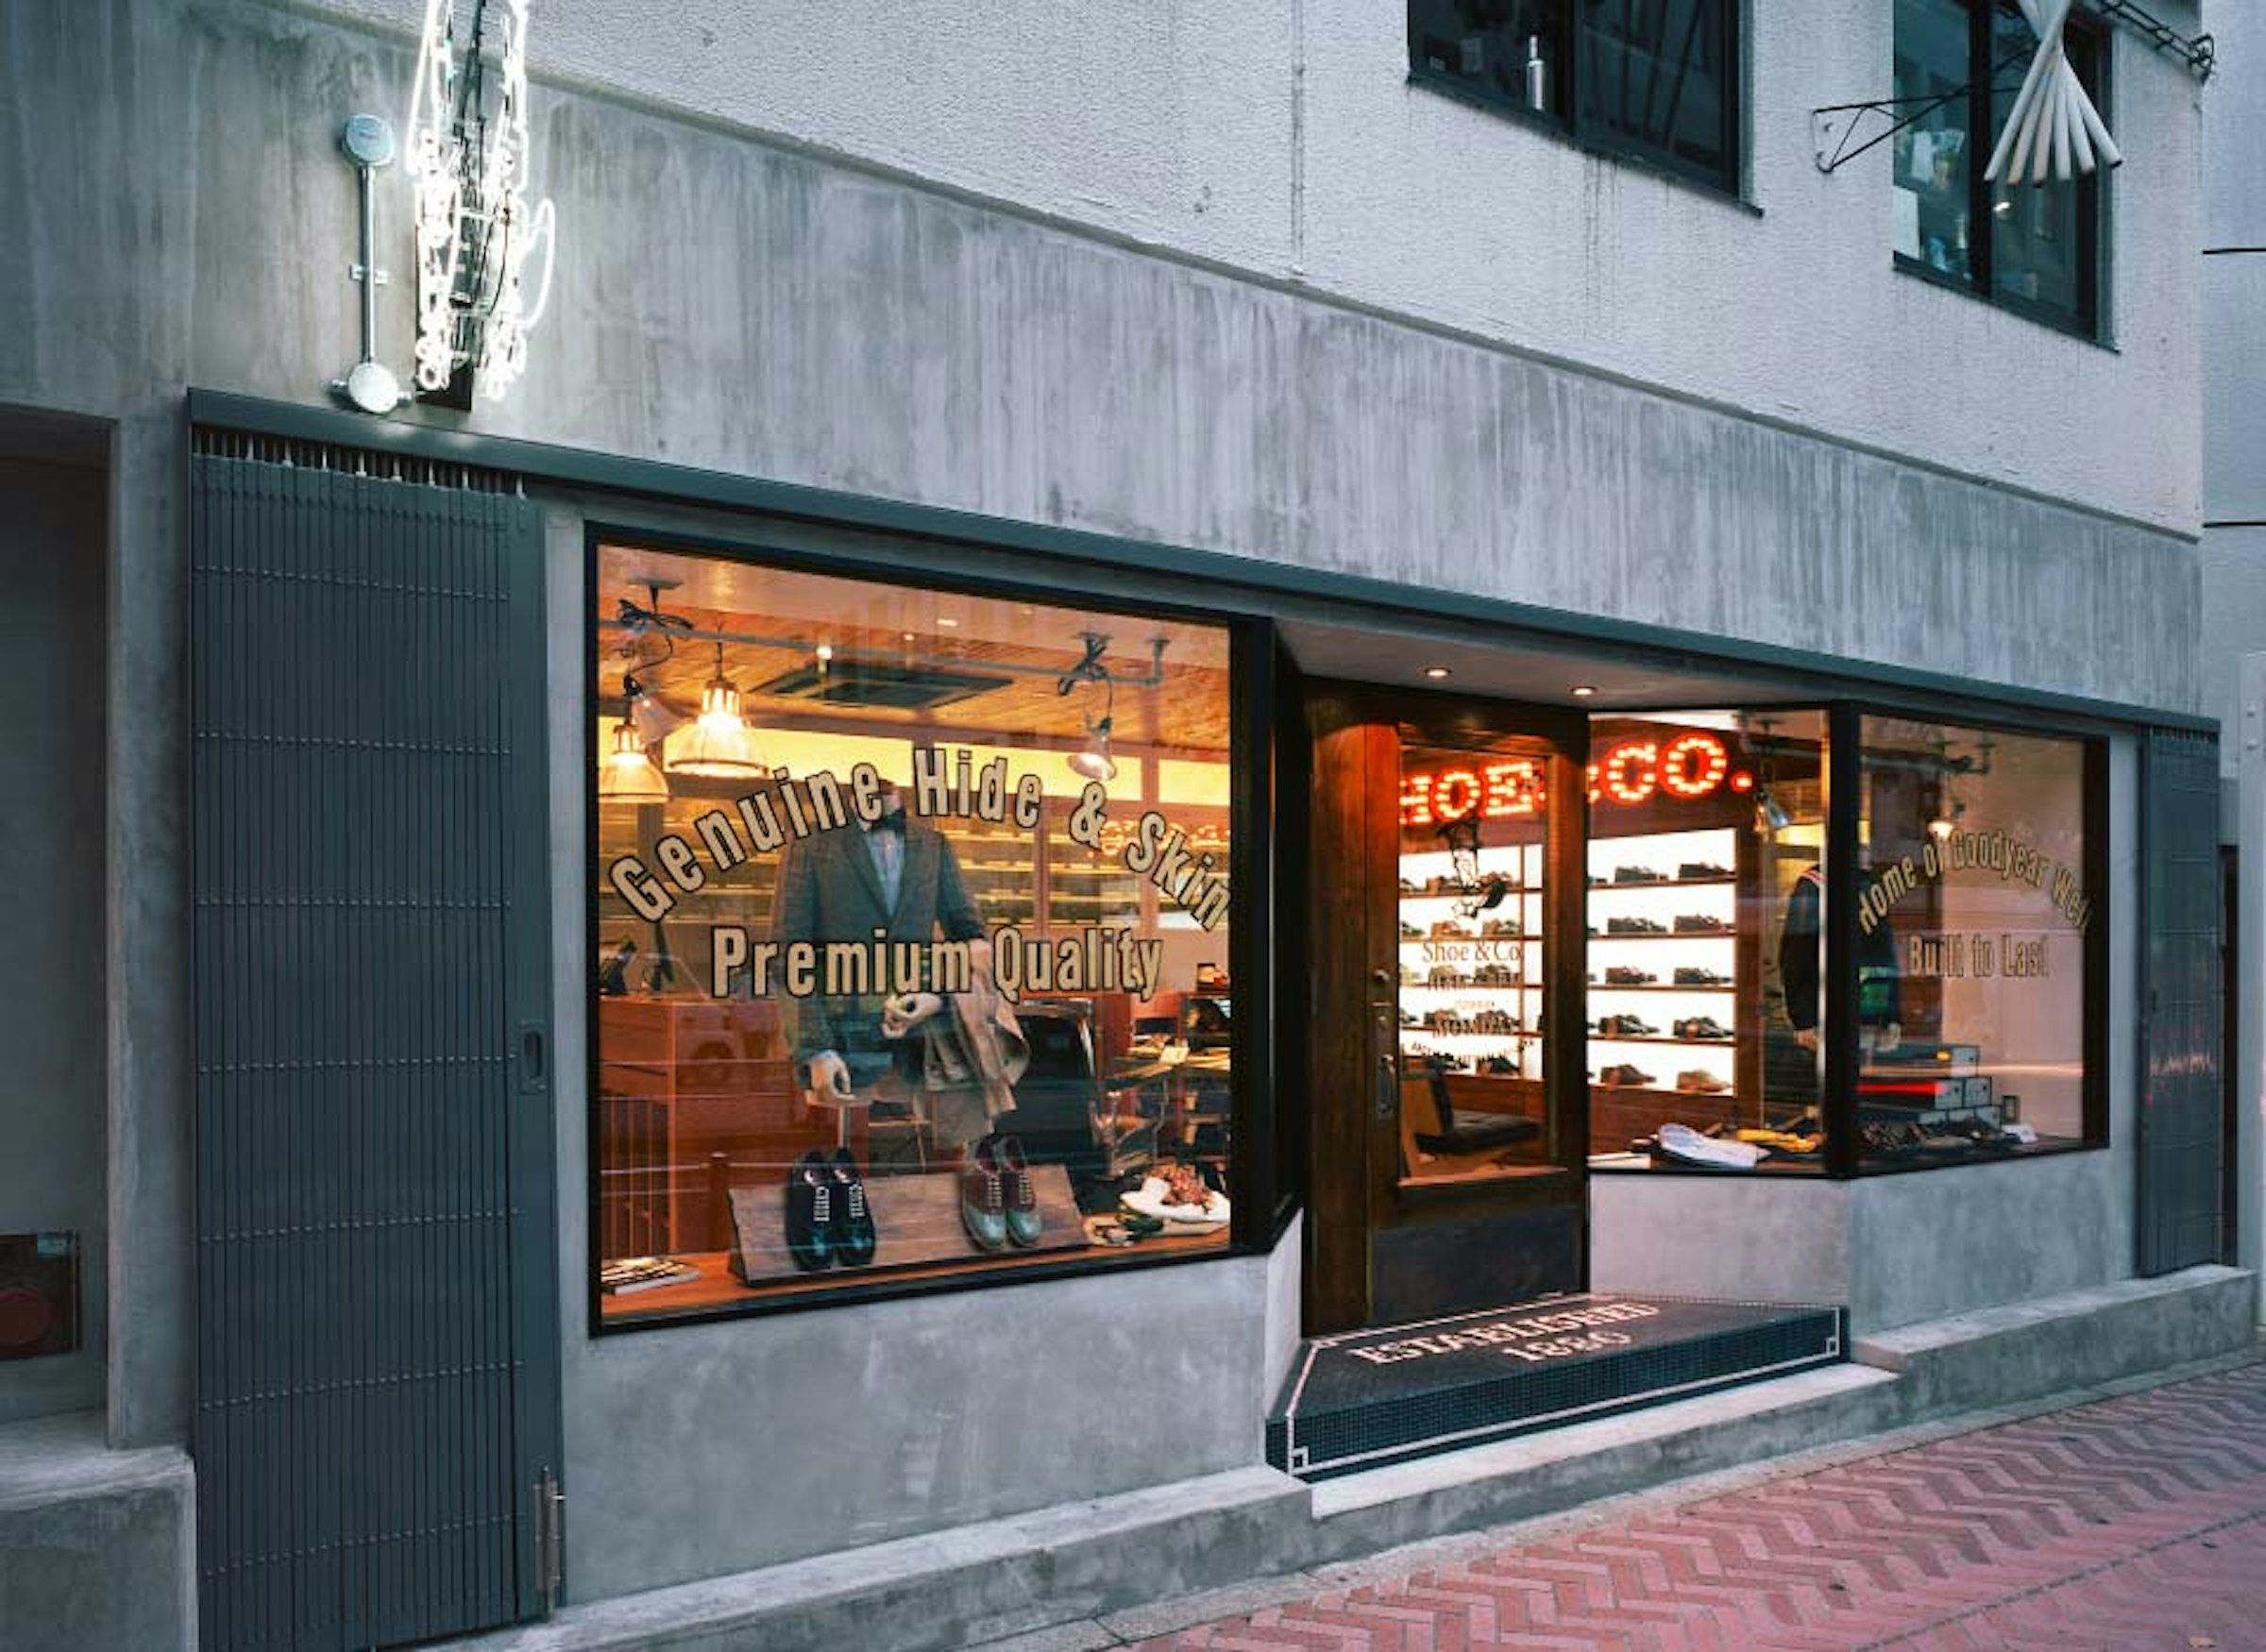 The direct store of REGAL Shoe & Co. in Shibuya